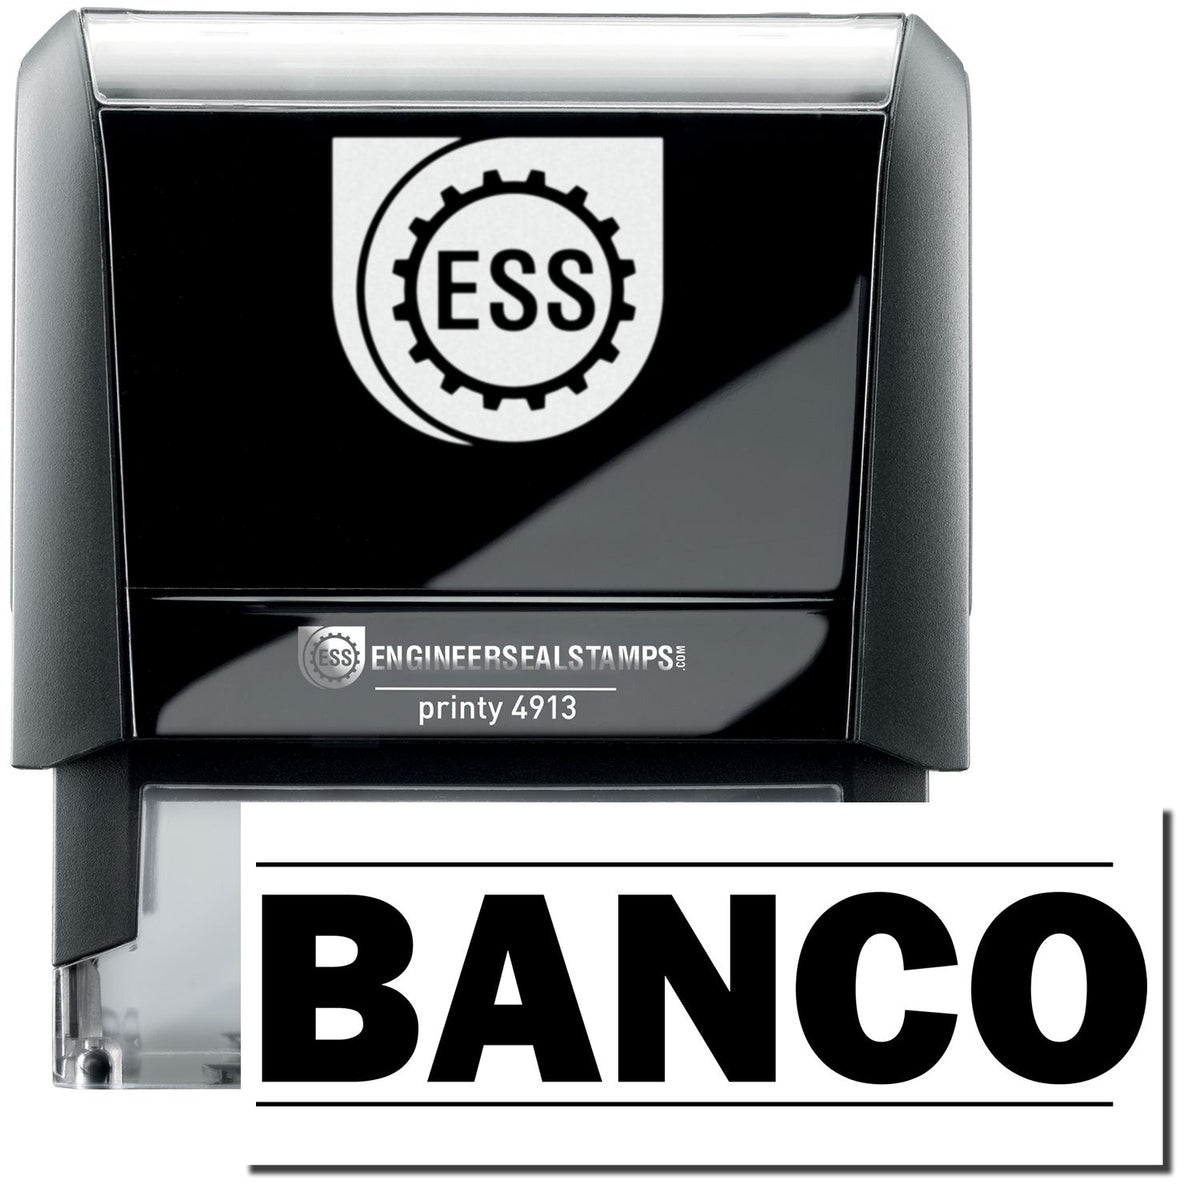 A self-inking stamp with a stamped image showing how the text &quot;BANCO&quot; in a large bold font is displayed by it after stamping.